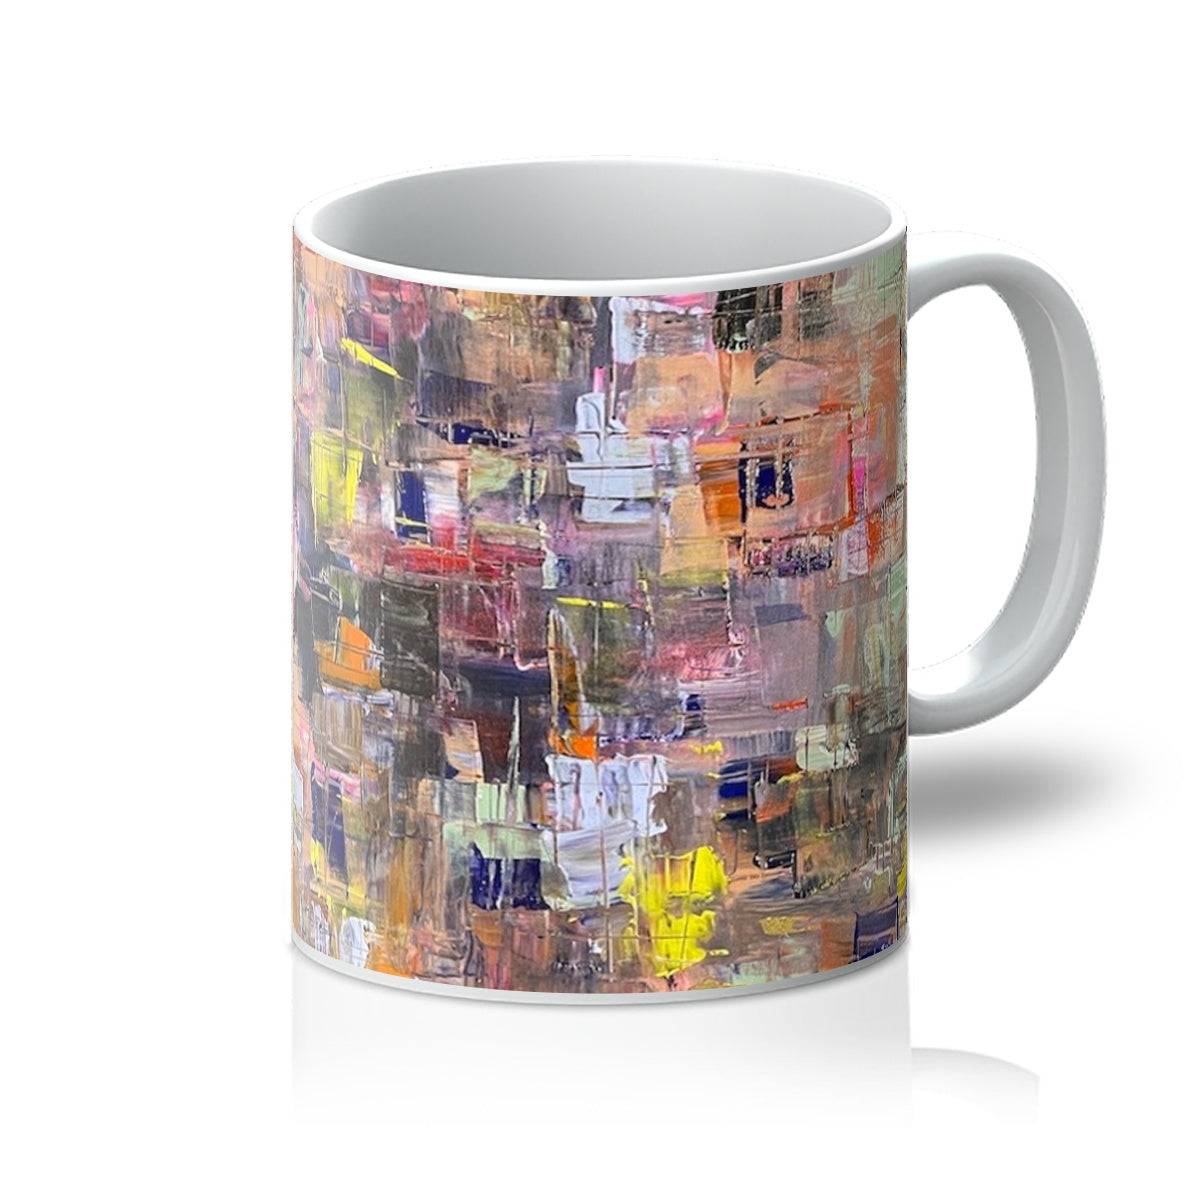 Never Enough Art Gifts Mug-Mugs-Abstract & Impressionistic Art Gallery-11oz-White-Paintings, Prints, Homeware, Art Gifts From Scotland By Scottish Artist Kevin Hunter